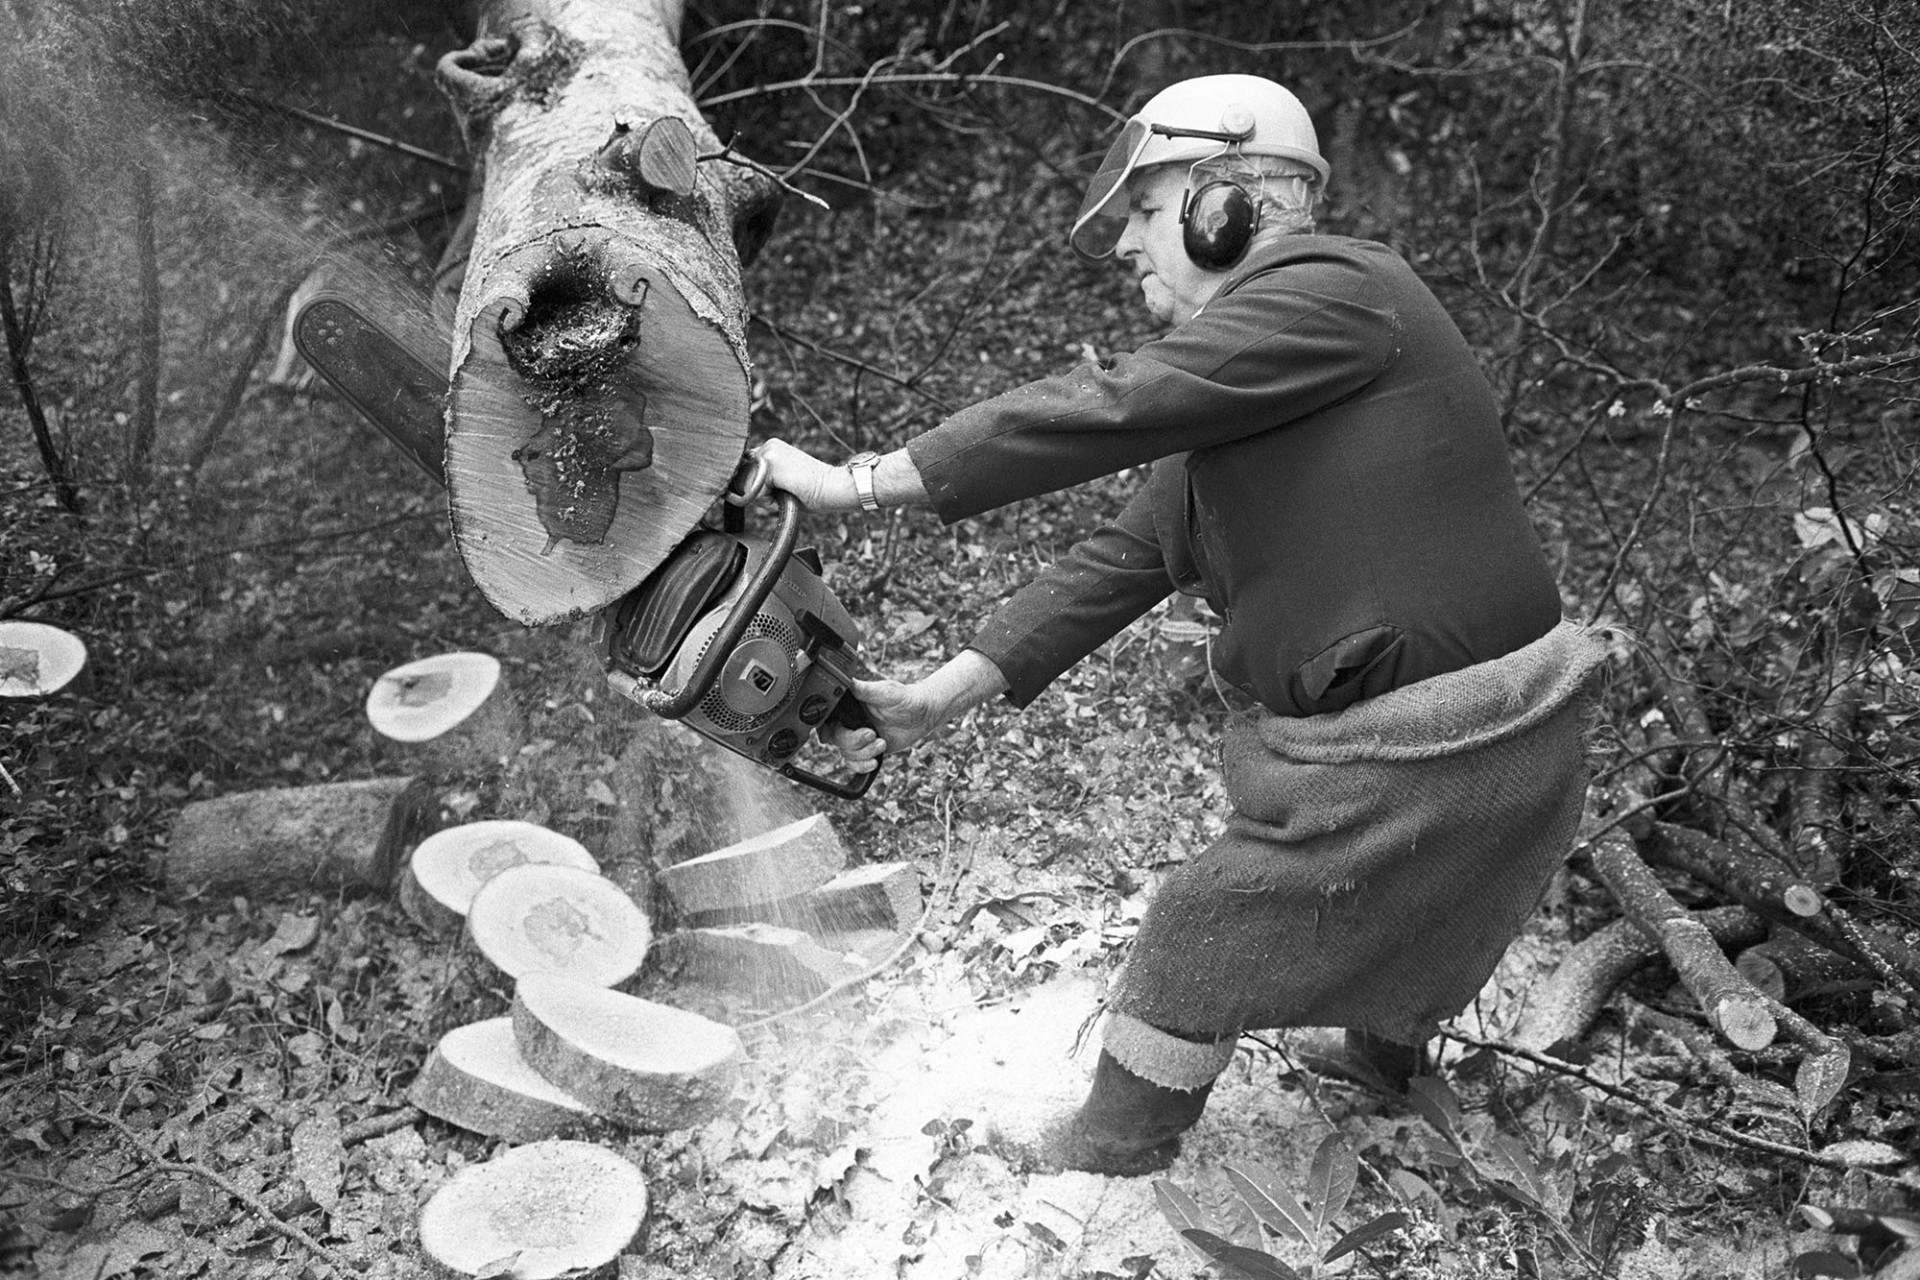 Man sawing up tree with chainsaw. 
[Horace Baker cutting up a tree trunk with a chainsaw at Halsdon, Dolton. He is wearing a sack around his waist and a protective helmet. Sawdust can be seen falling from the chainsaw.]